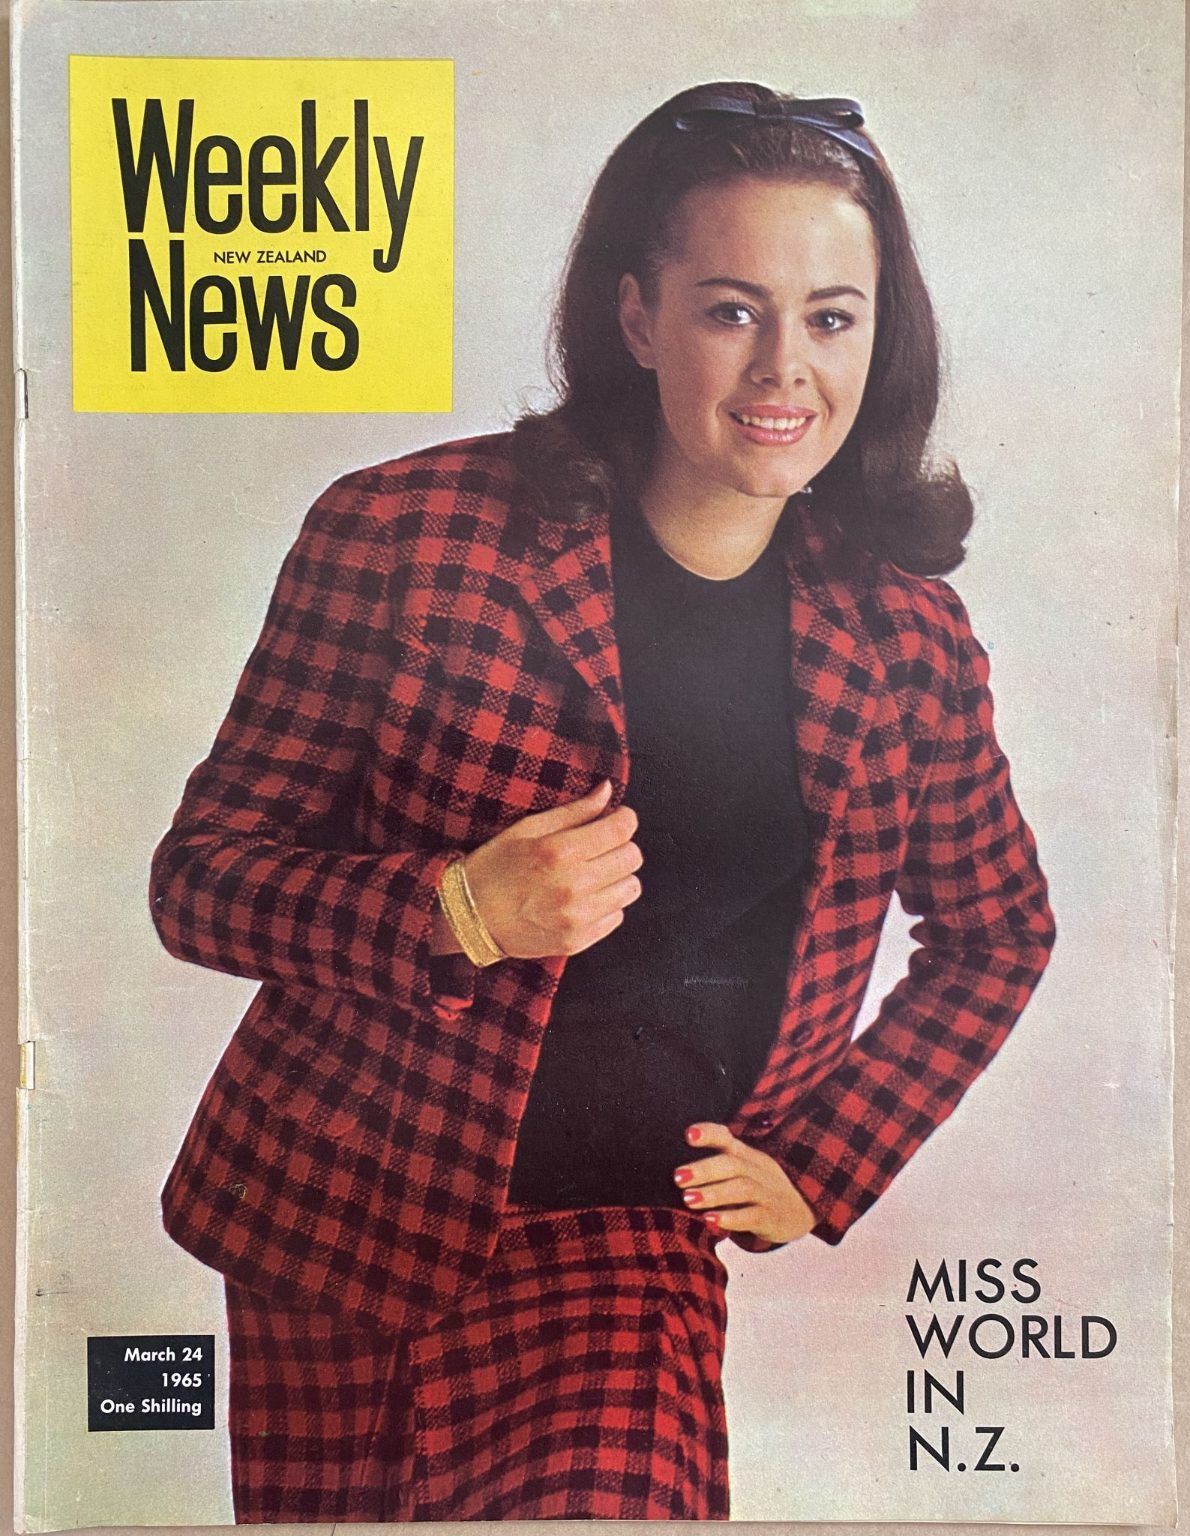 OLD NEWSPAPER: New Zealand Weekly News, No. 5287, 24 March 1965